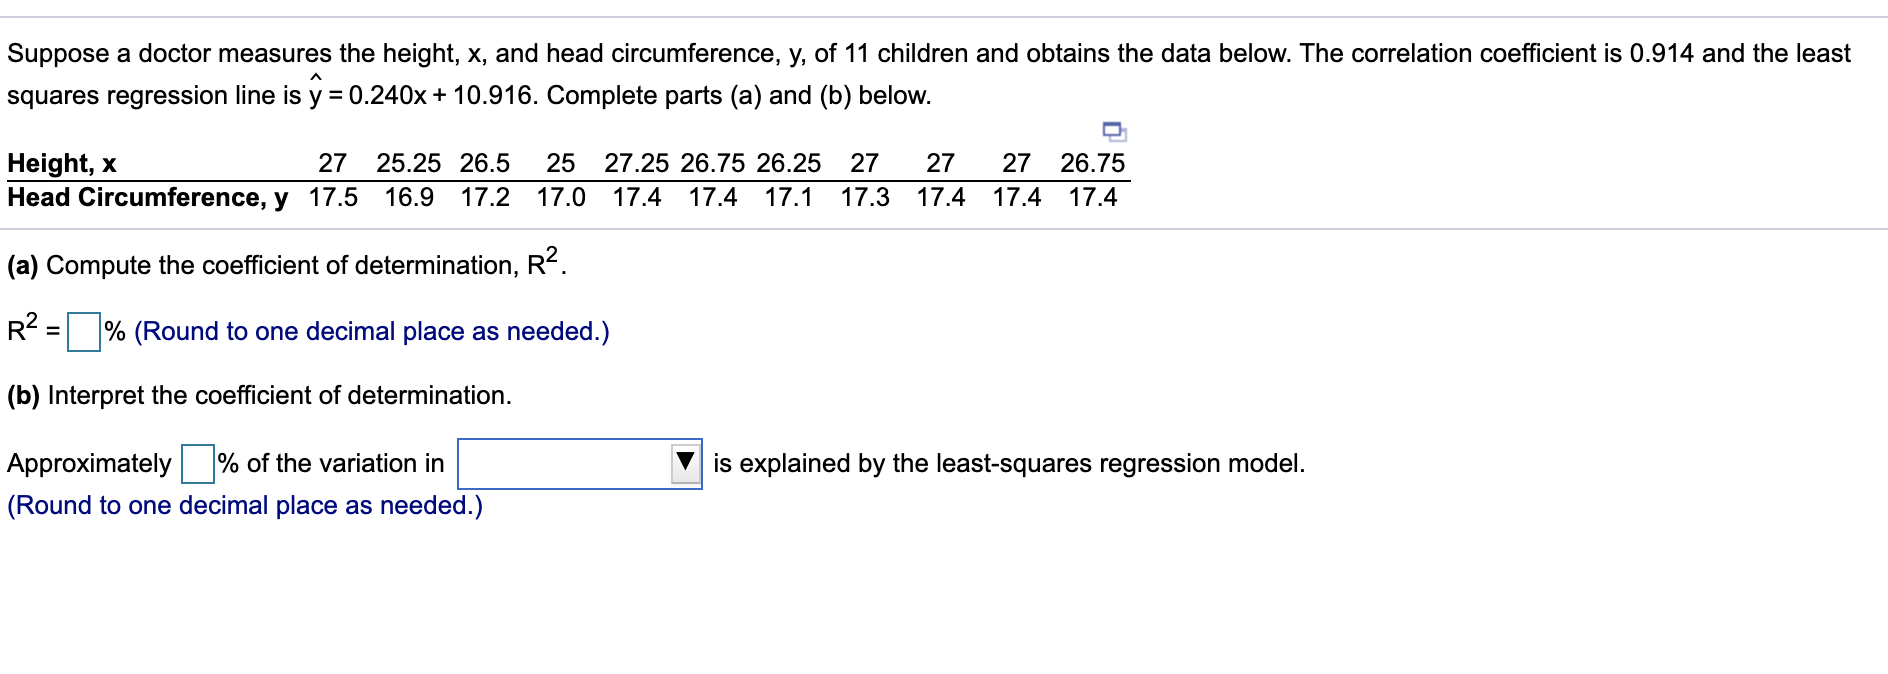 Suppose a doctor measures the height, x, and head circumference, y, of 11 children and obtains the data below. The correlation coefficient is 0.914 and the least
squares regression line is y = 0.240x + 10.916. Complete parts (a) and (b) below.
27 26.75
Height, x
Head Circumference, y 17.5
27 25.25 26.5
25
27.25 26.75 26.25 27
27
16.9
17.2 17.0
17.4 17.4 17.1
17.3 17.4 17.4 17.4
(a) Compute the coefficient of determination, R².
R² = % (Round to one decimal place as needed.)
(b) Interpret the coefficient of determination.
Approximately % of the variation in
is explained by the least-squares regression model.
(Round to one decimal place as needed.)
